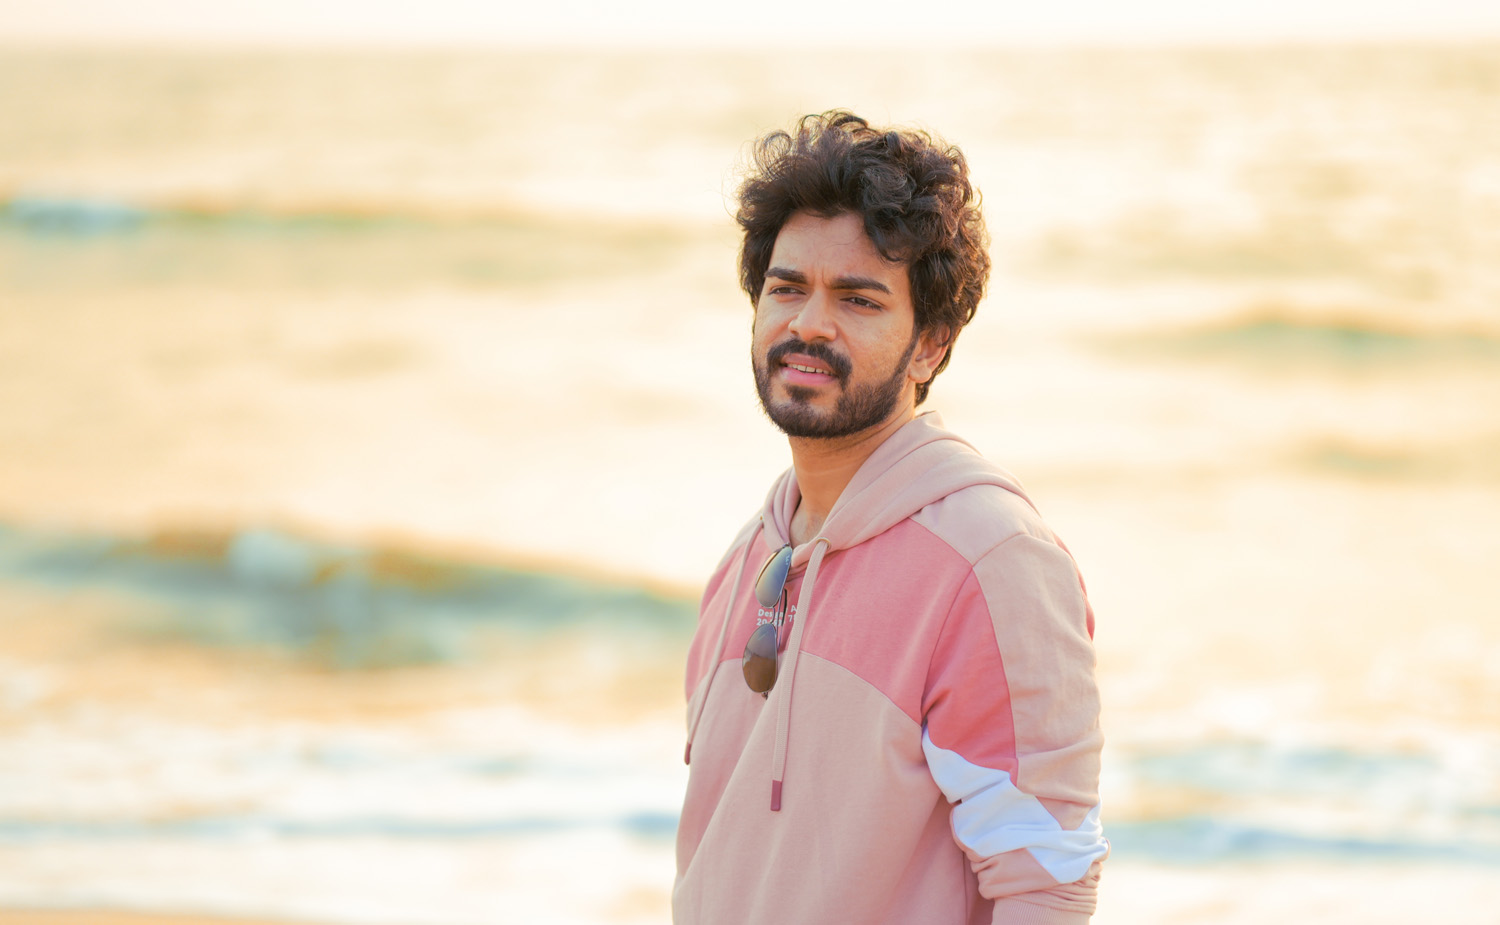 Dhanesh Anand, Young malayalam movie actor, Malayalam movie actors, mollywood, Malayali, mallu boys, kerala actor, dhanesh, forensic movie actor